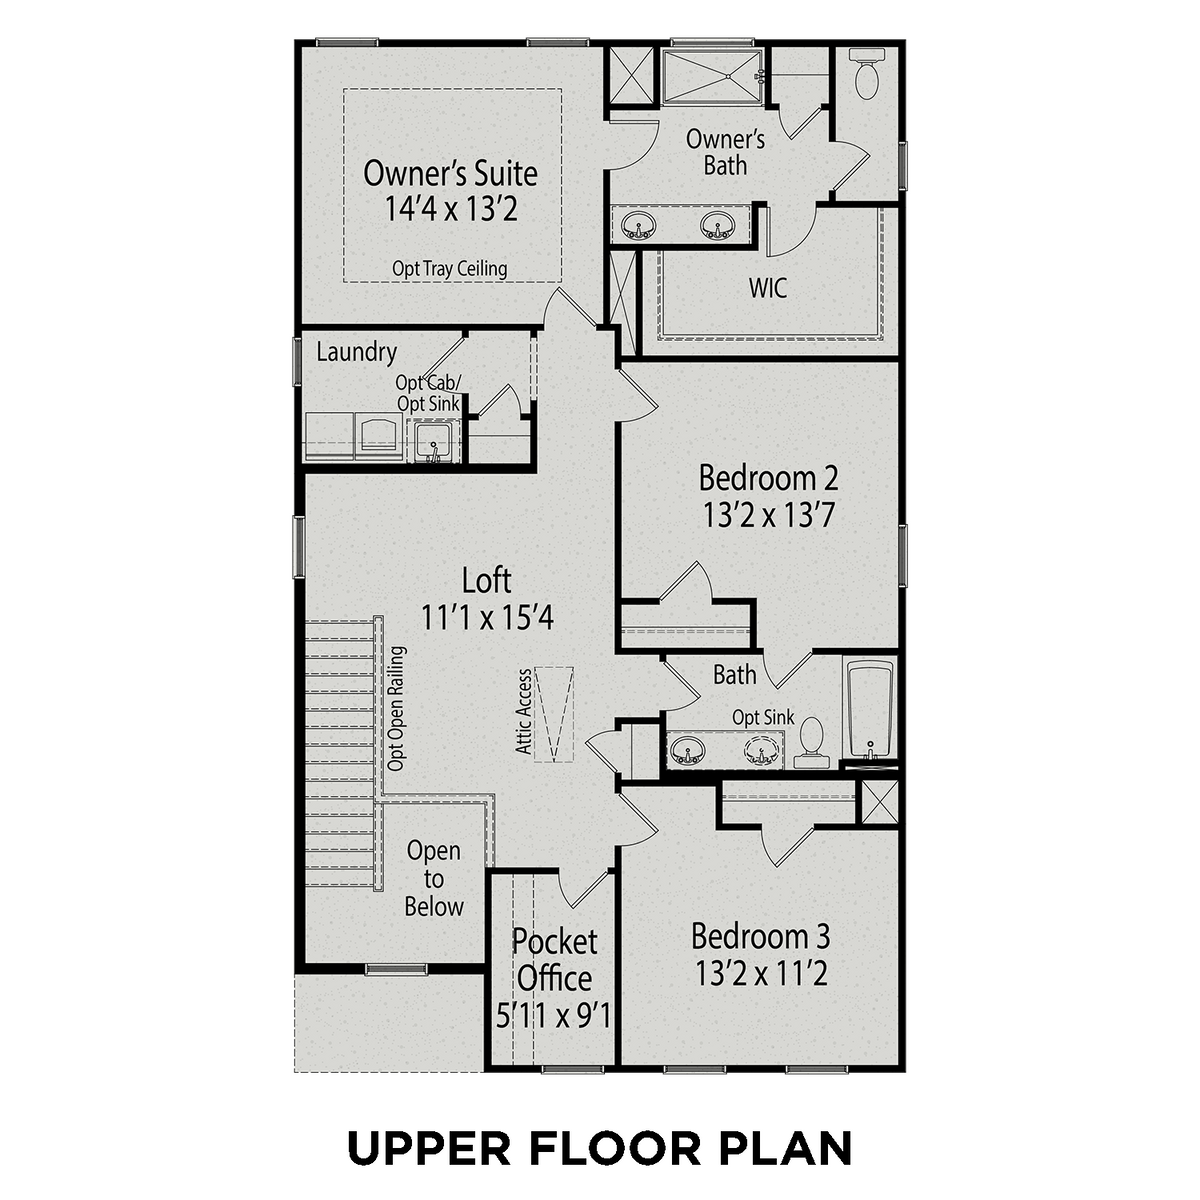 2 - The Gavin A floor plan layout for 59 Grassy Ridge Court in Davidson Homes' Beverly Place community.